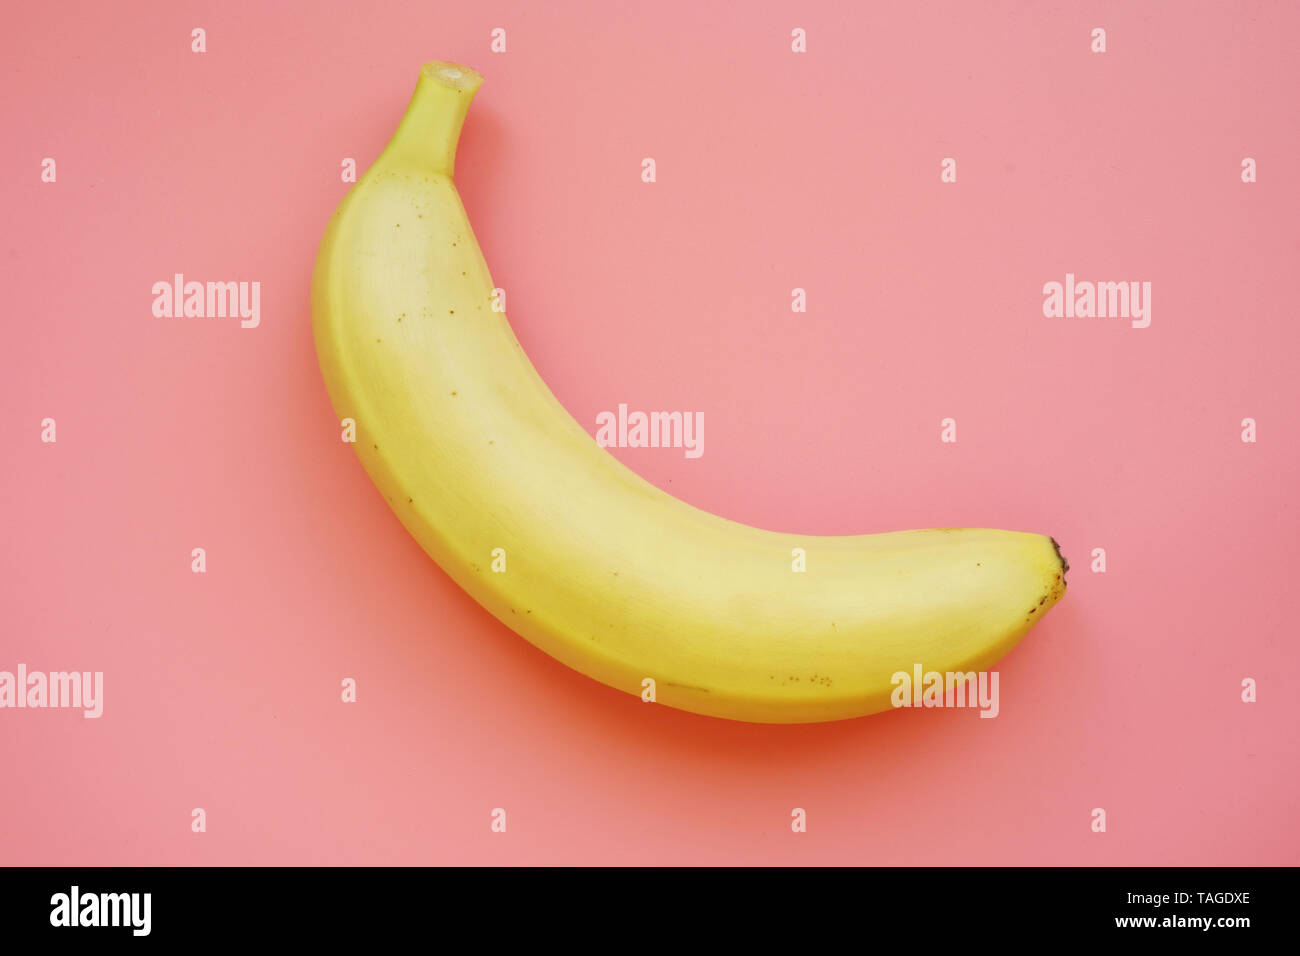 Banana on a pink background. Colorful fruit pattern. Stock Photo